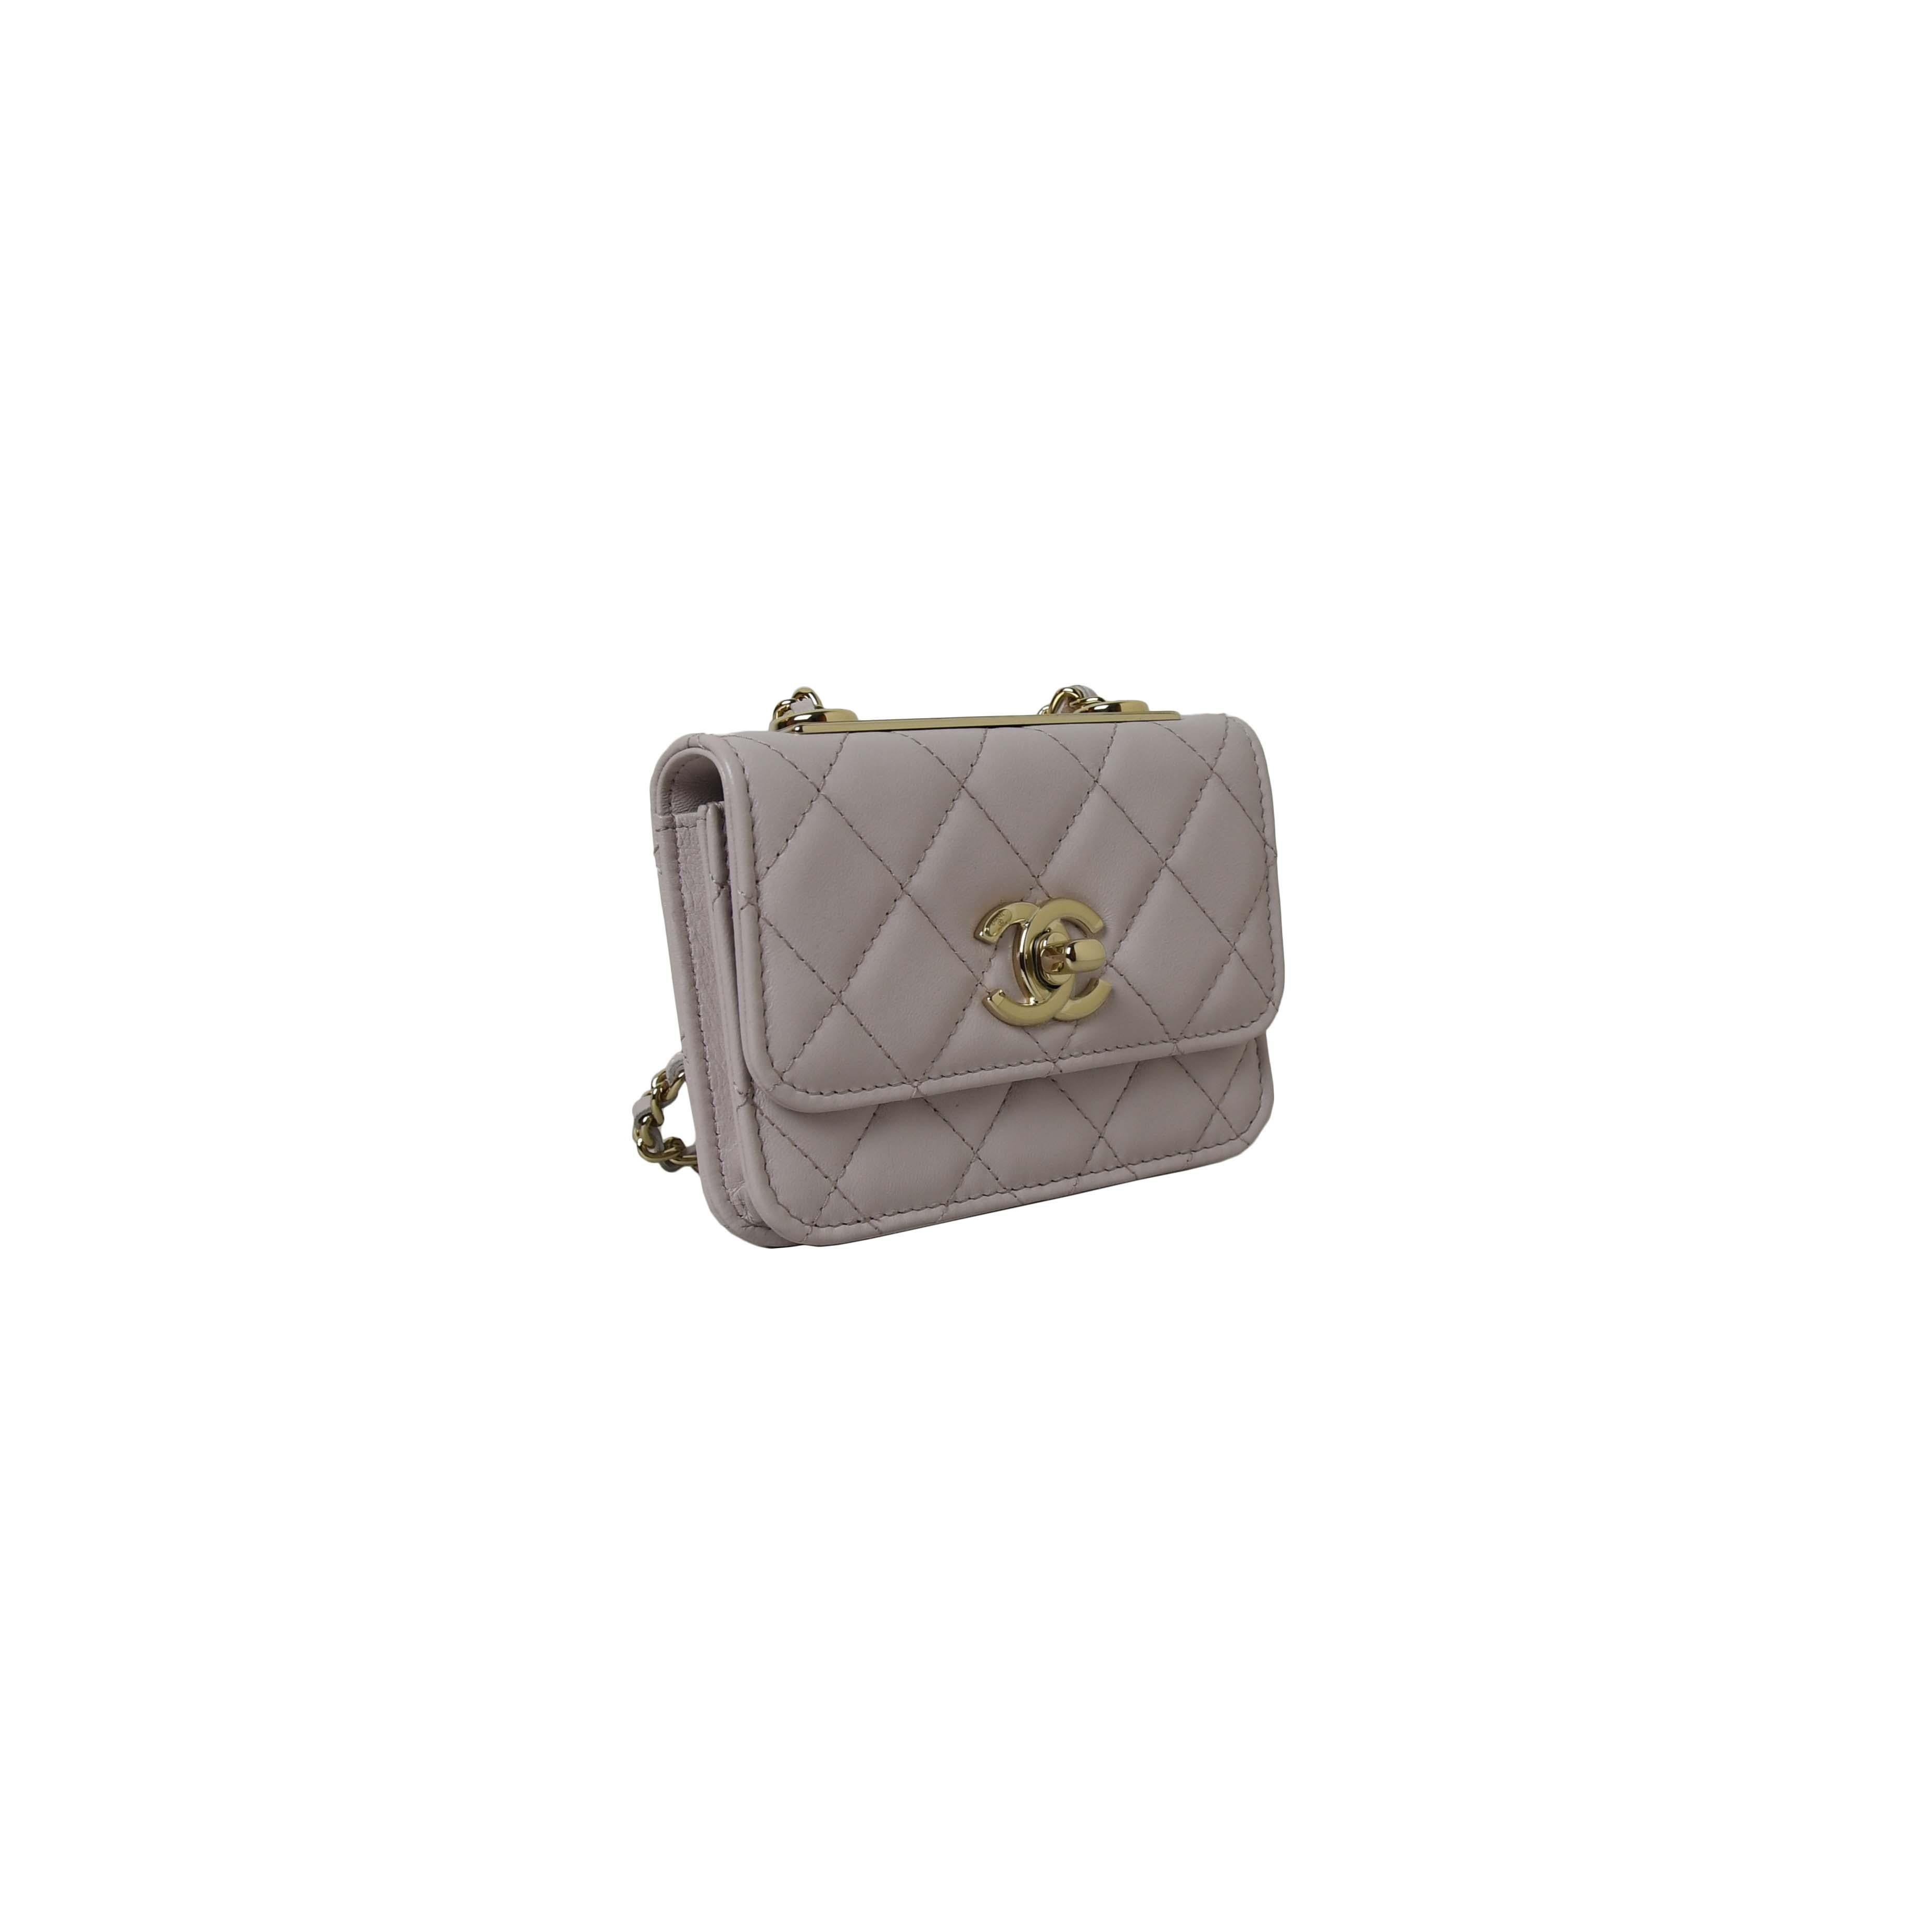 Chanel Quilted Mini Trendy CC Wallet On Chain Light Purple

Condition: Brand New

Dimension: 4.75 x 3.75 x 1 in; Drop: 21 in

Accompanied by: This item comes with all accessories

